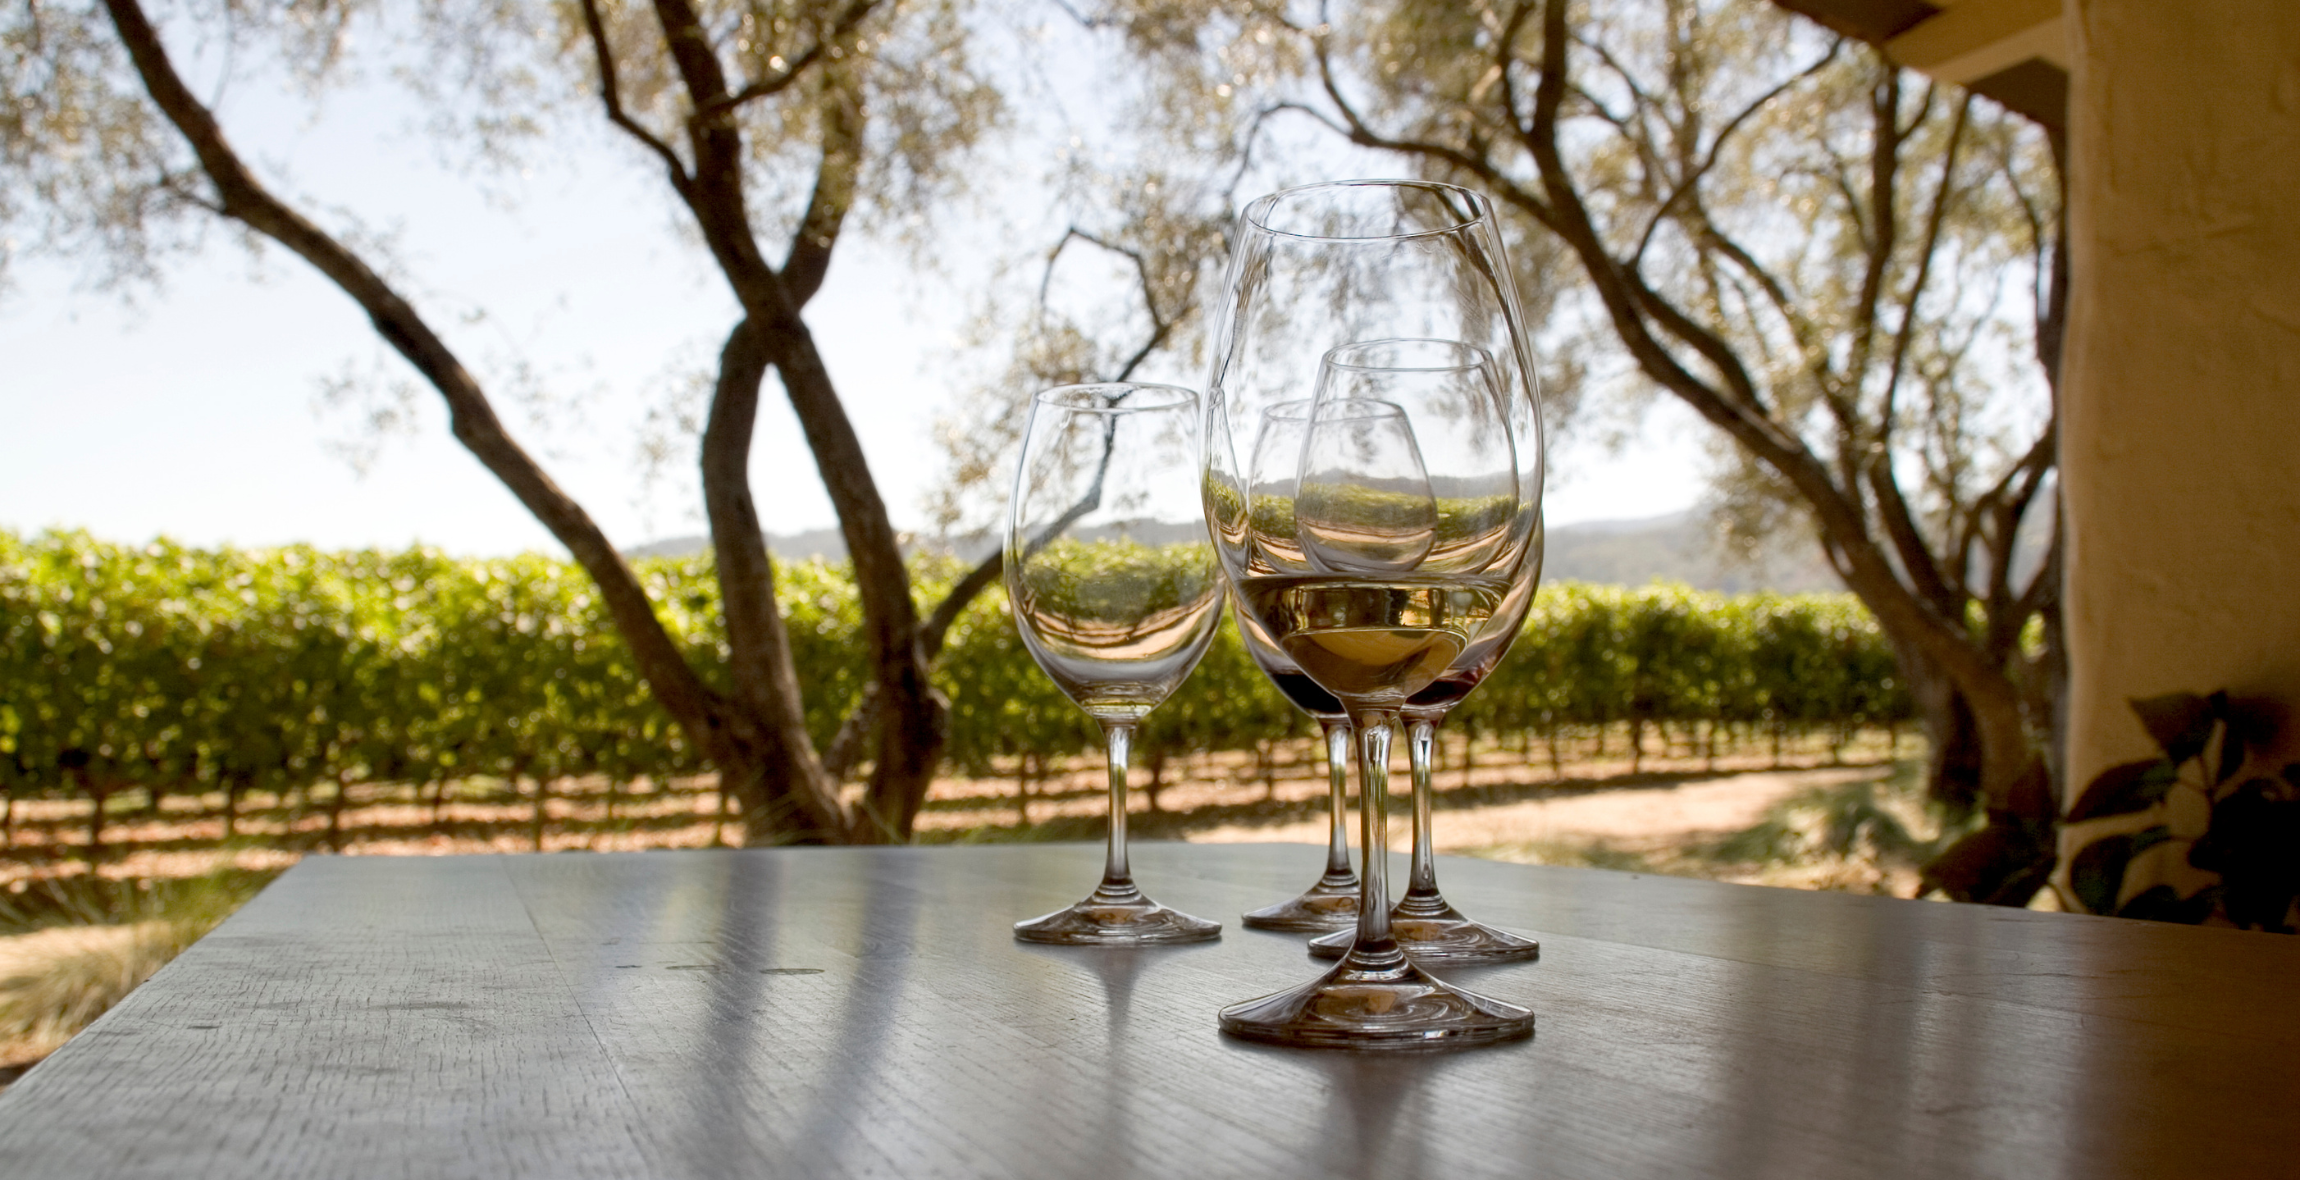 two wine glasses sit on a table in front of a vineyard